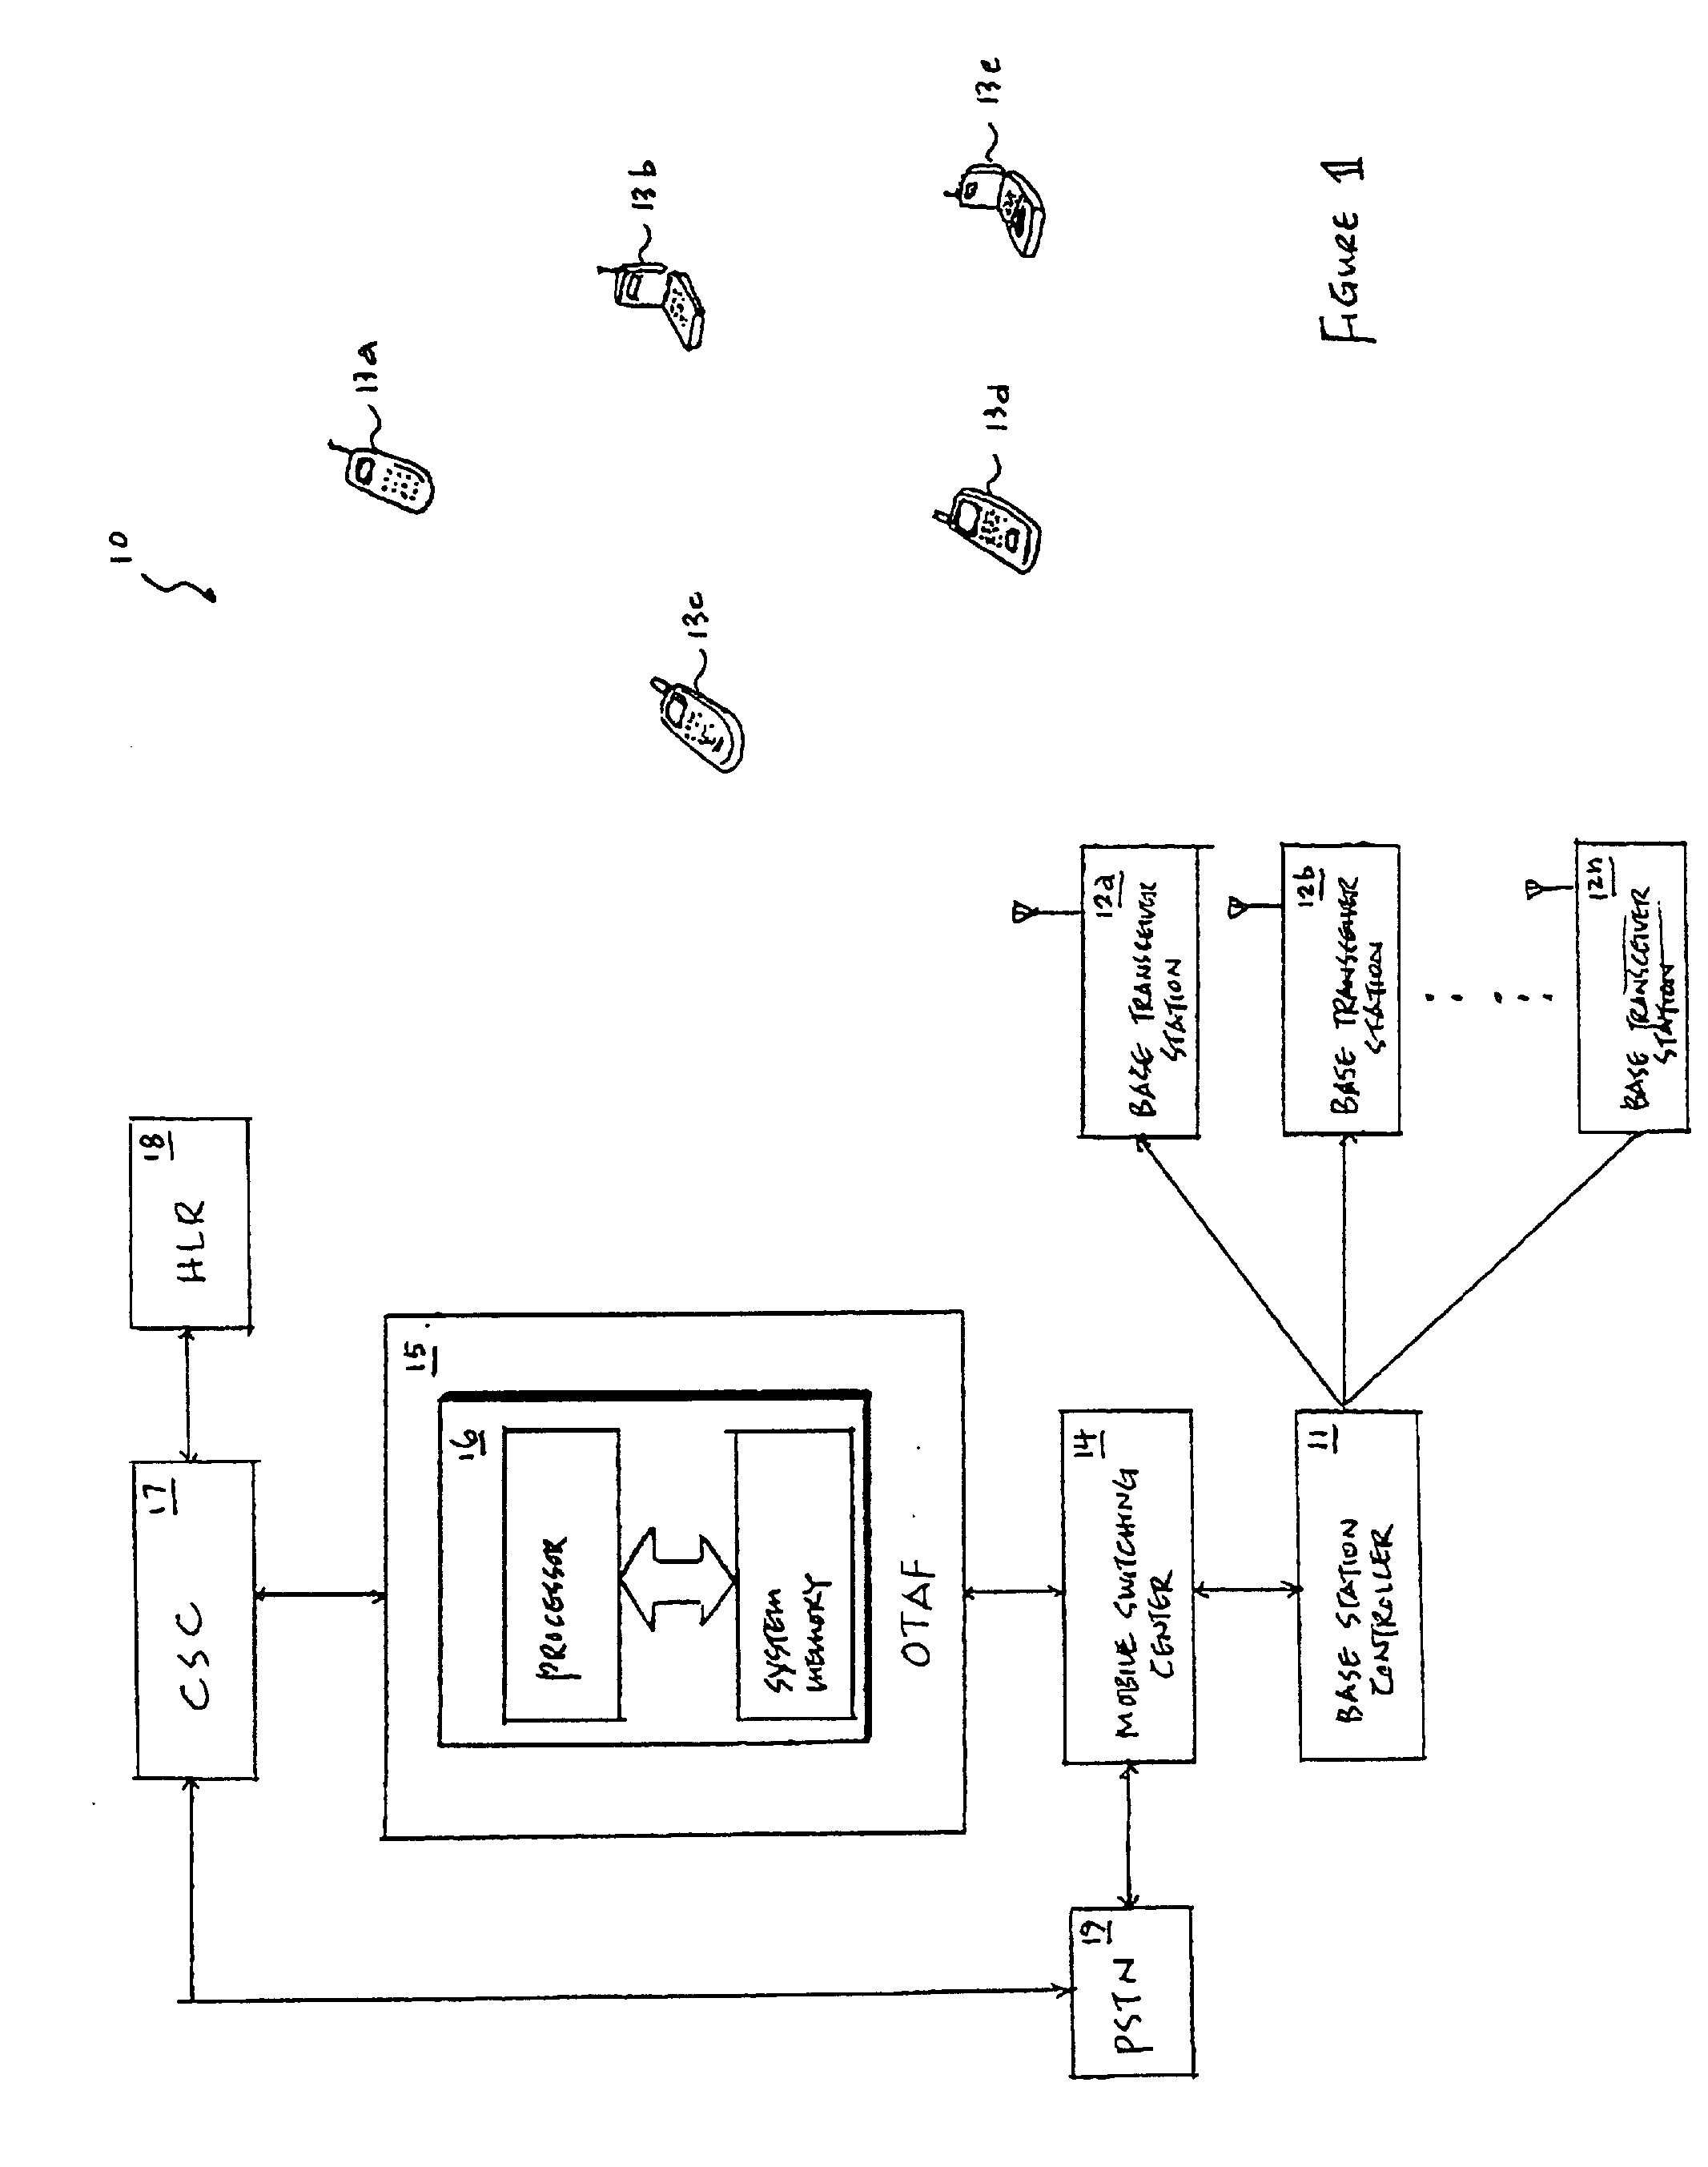 Enhanced method and system for programming a mobile telephone over the air within a mobile telephone communication network